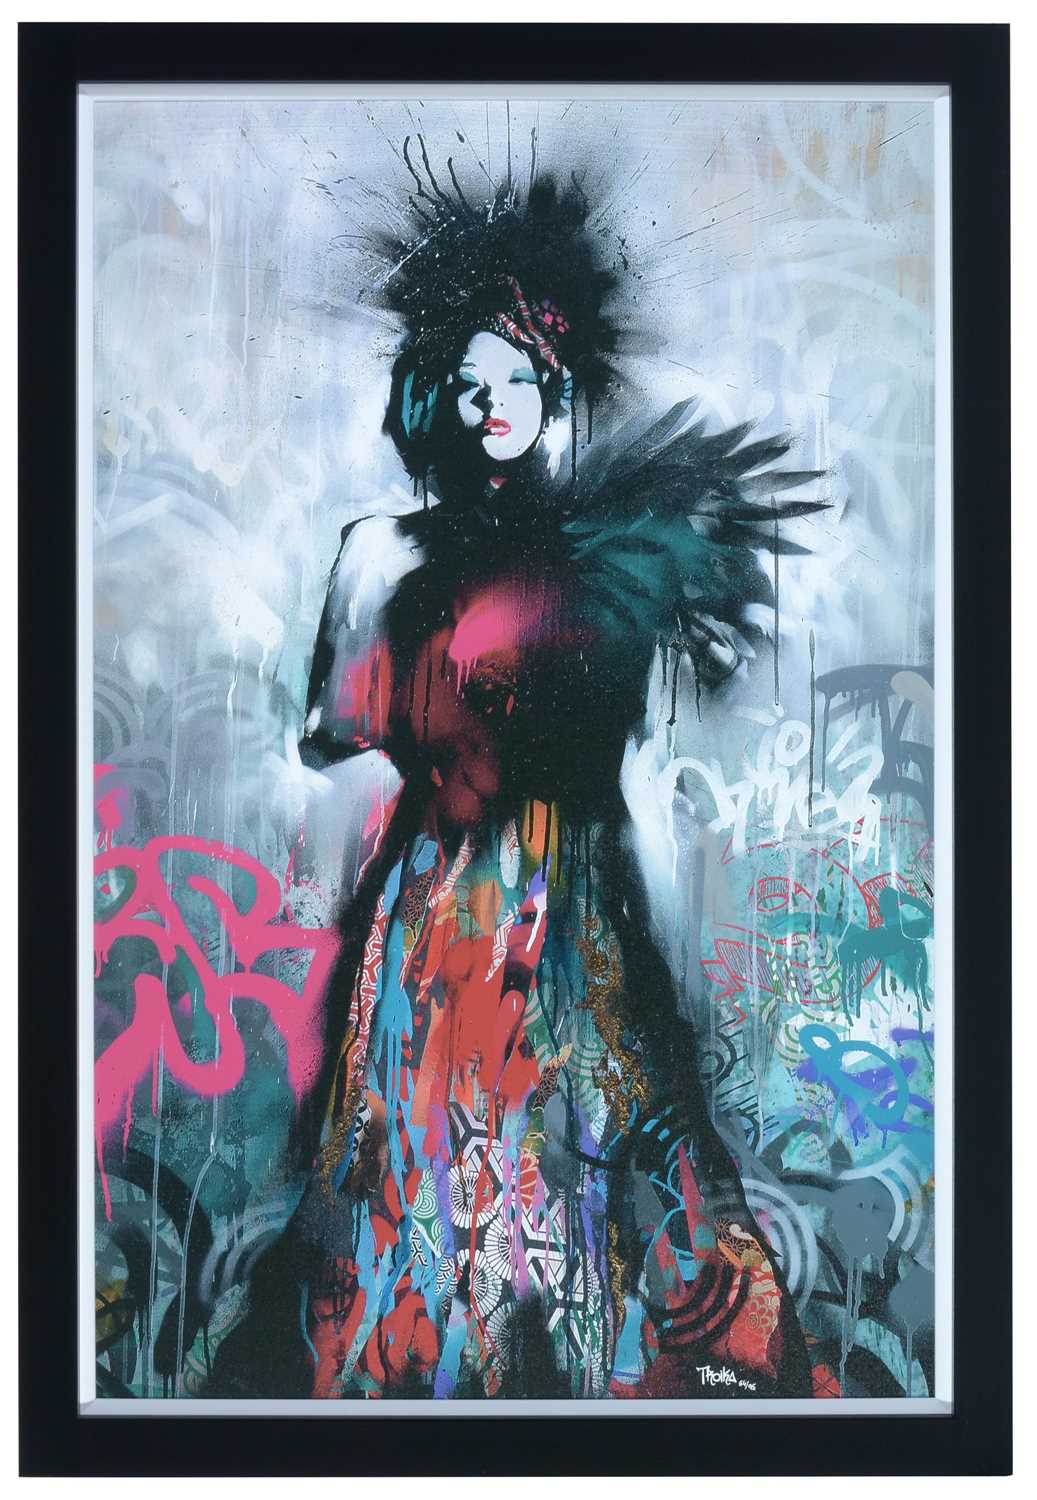 Lot 818 - Troika - limited edition print